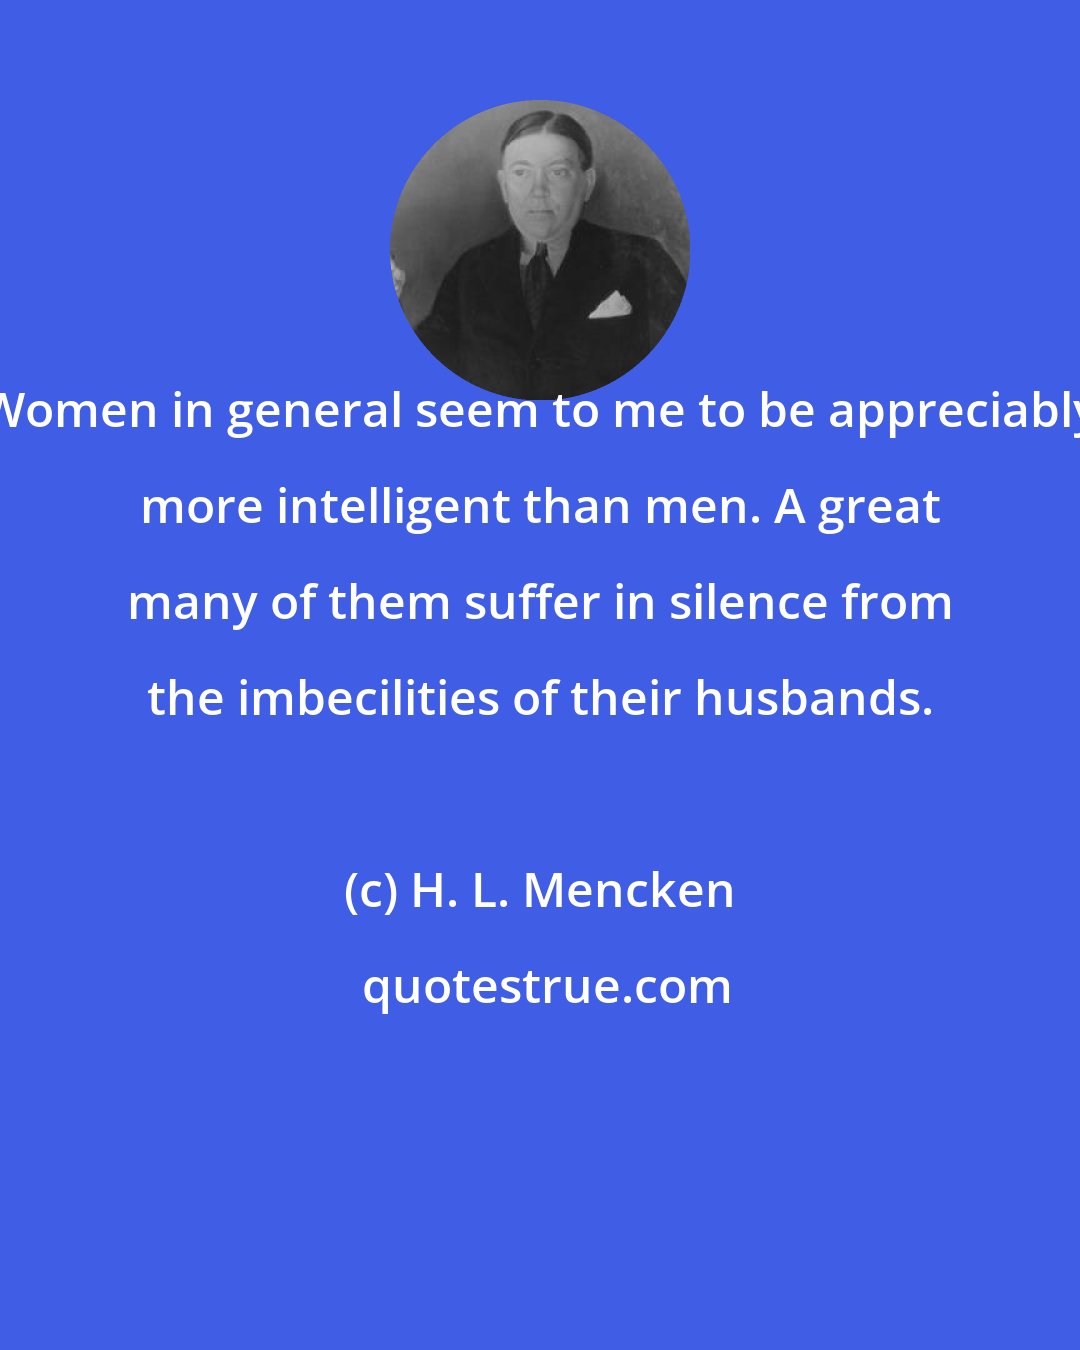 H. L. Mencken: Women in general seem to me to be appreciably more intelligent than men. A great many of them suffer in silence from the imbecilities of their husbands.